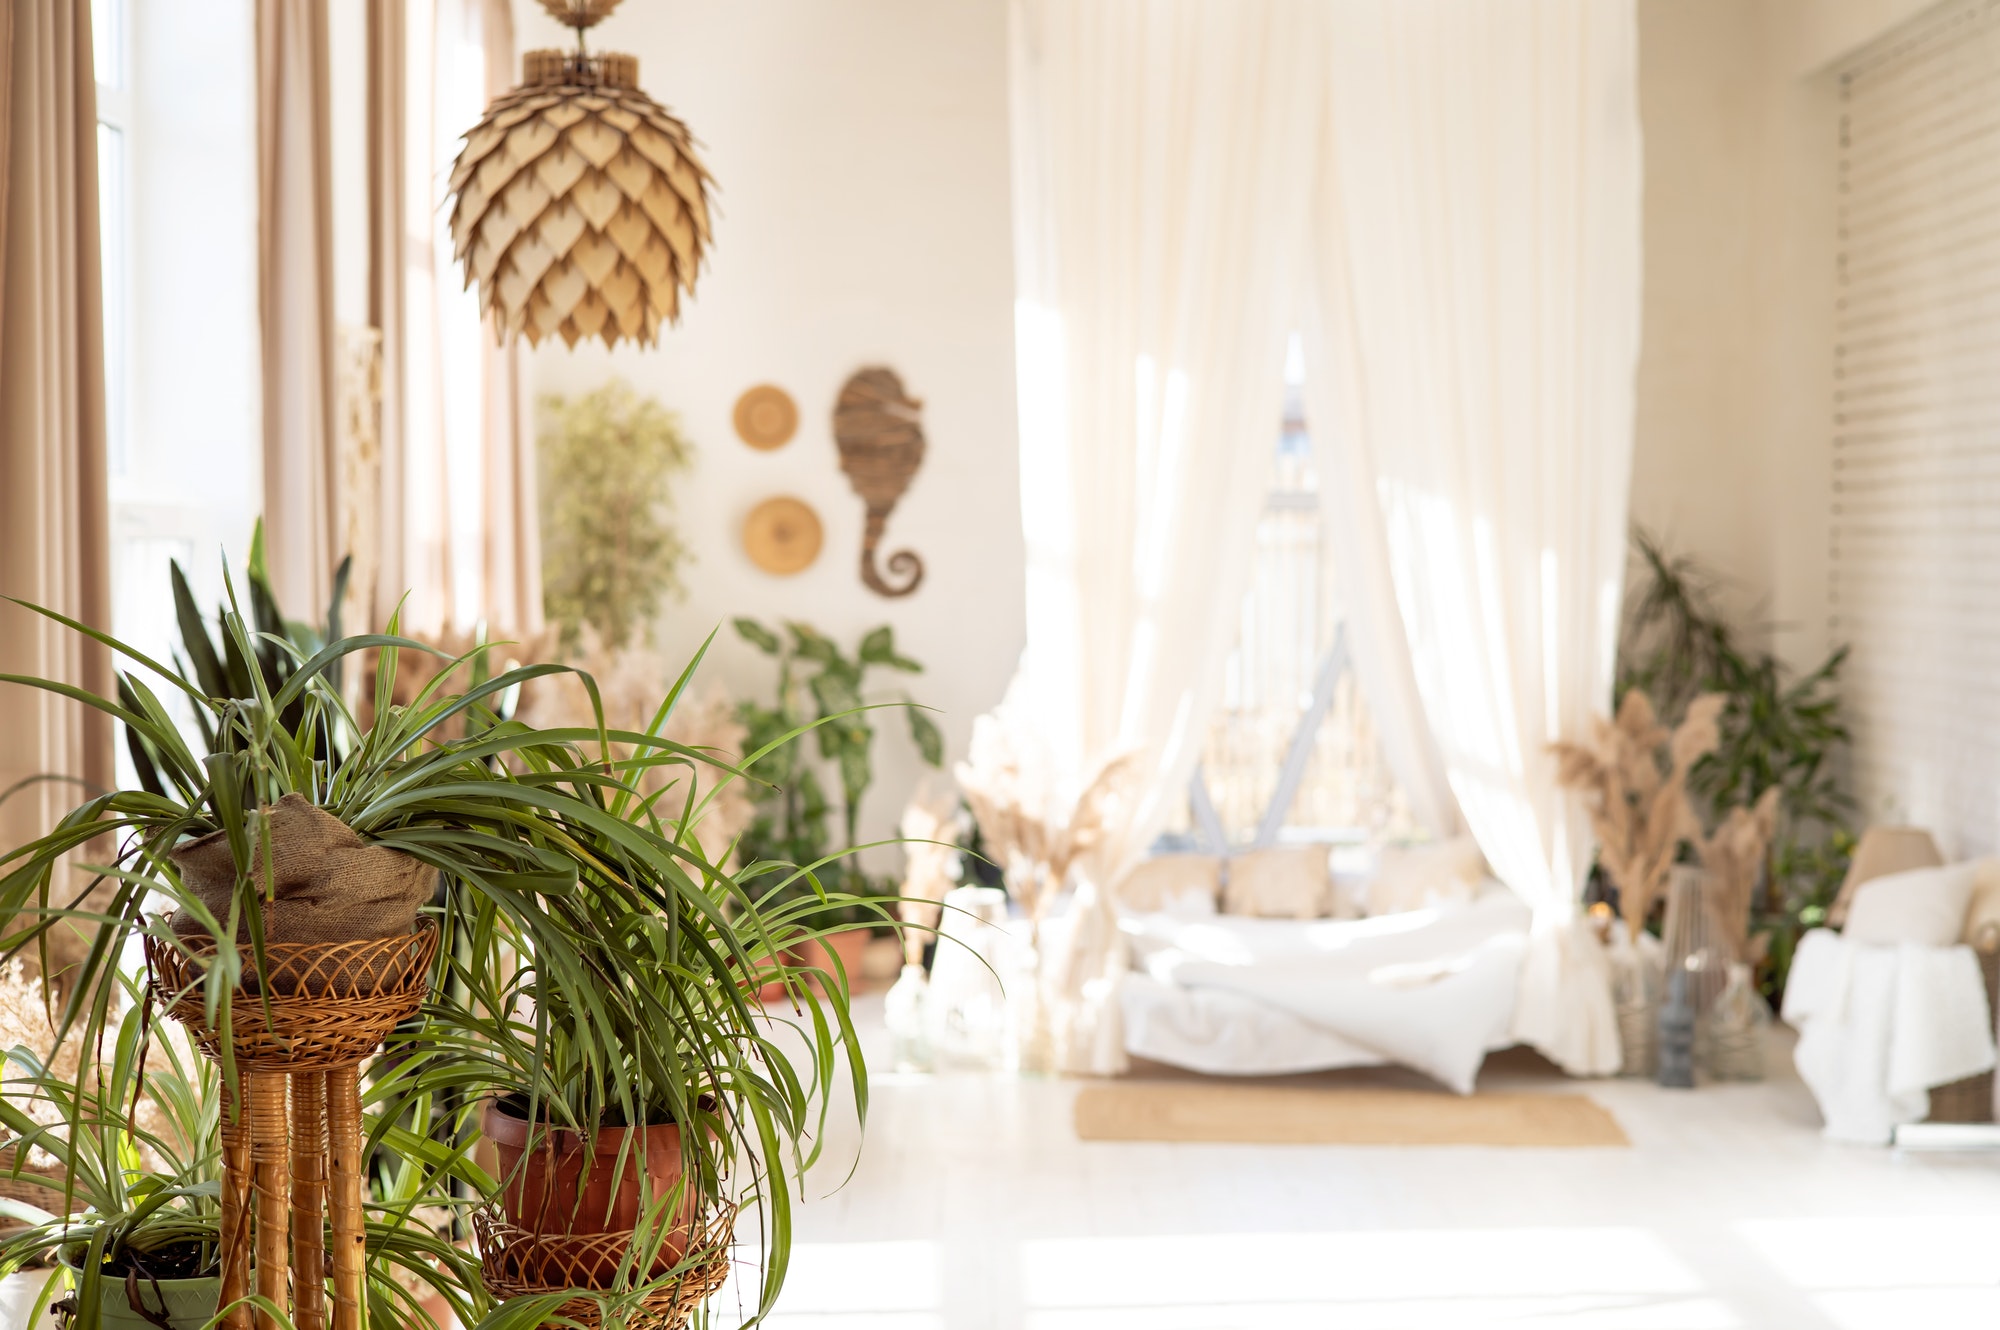 Stylish room interior with different house plants